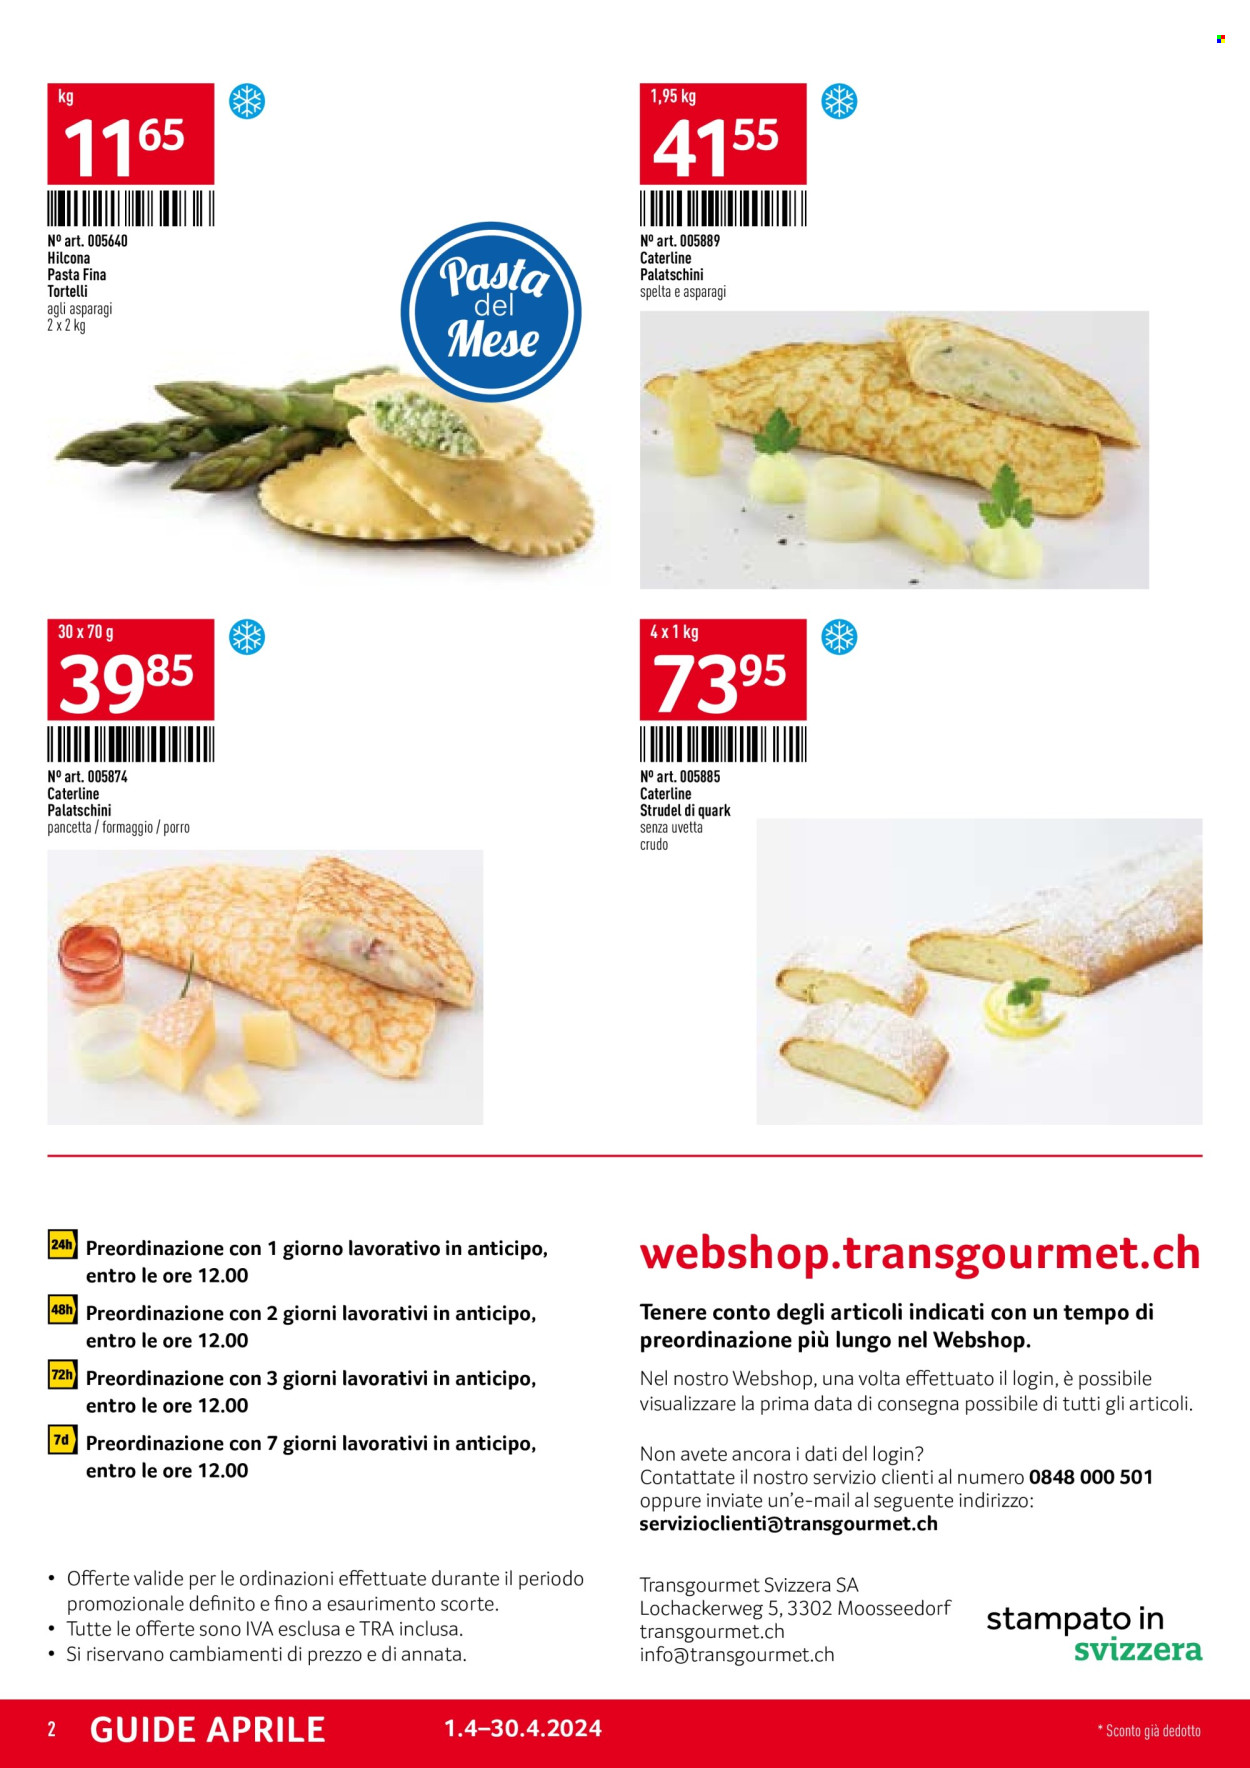 Catalogue TransGourmet - 1.4.2024 - 30.4.2024. Page 2.